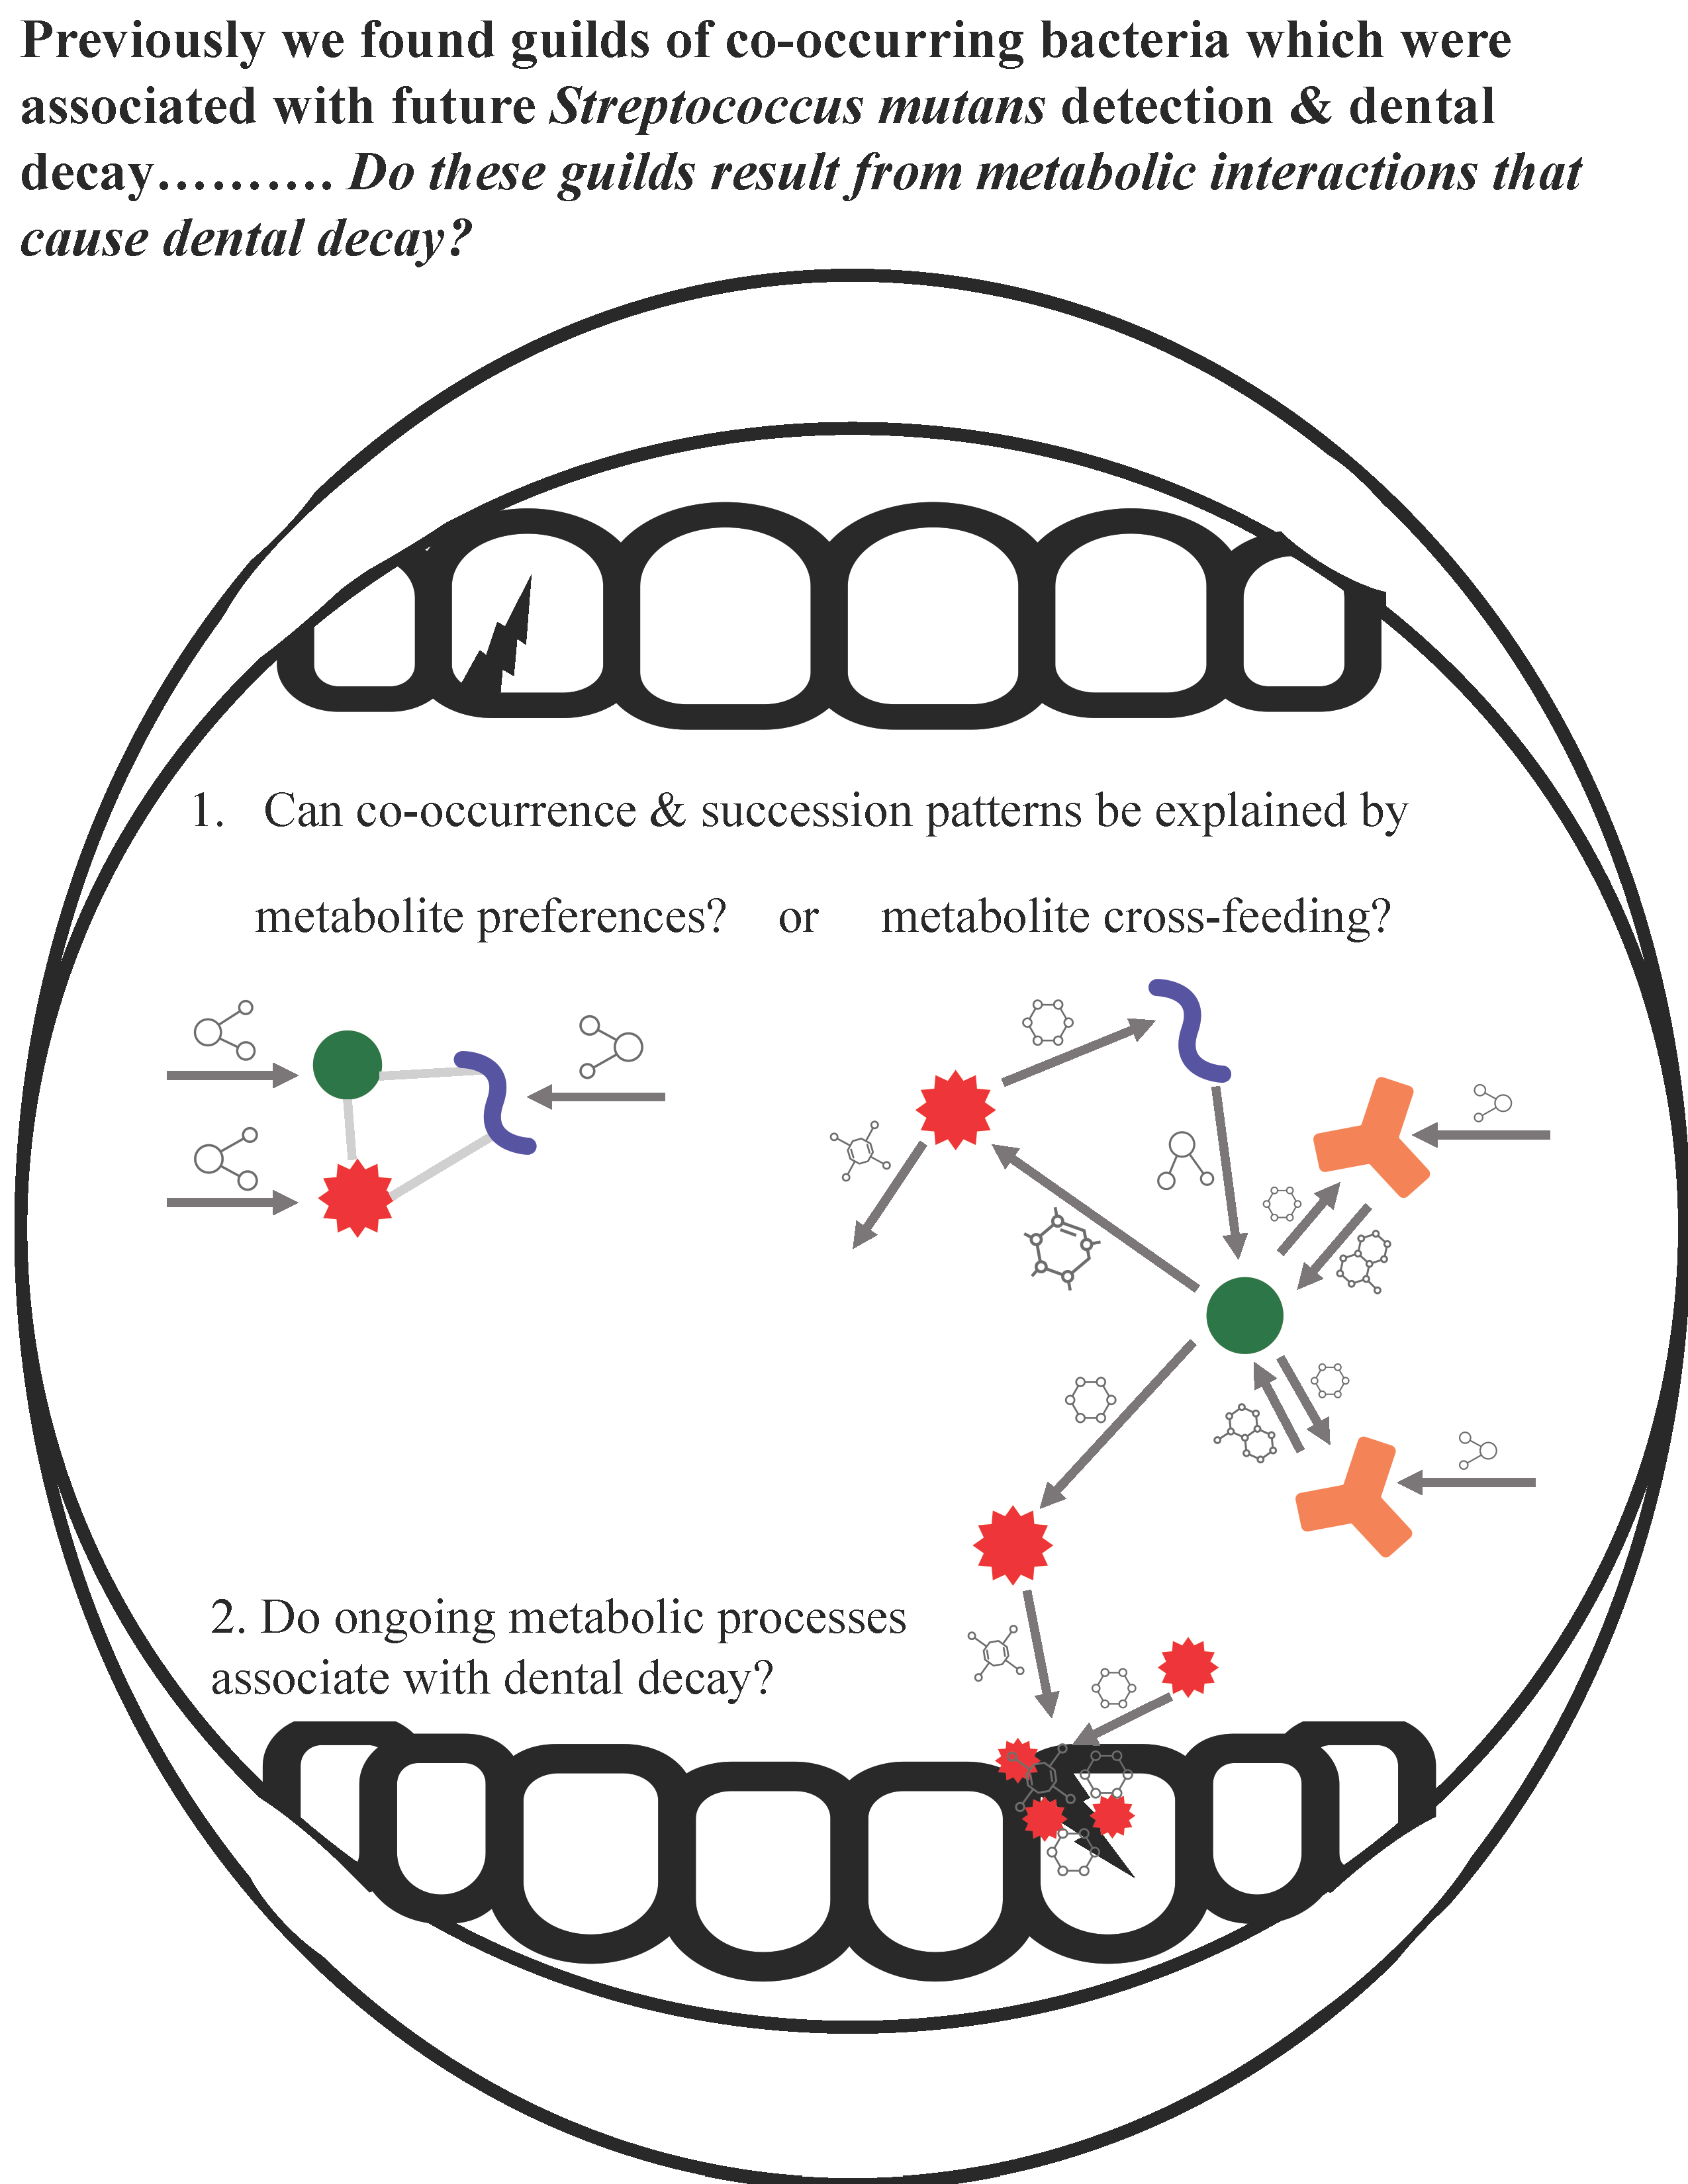 This graphical abstract is an open mouth with shapes representing different bacteria that may cause carries. Text includes: Previously we found guilds of co-occurring bacteria which were associated with future Streptococcus mutans detection & dental decay